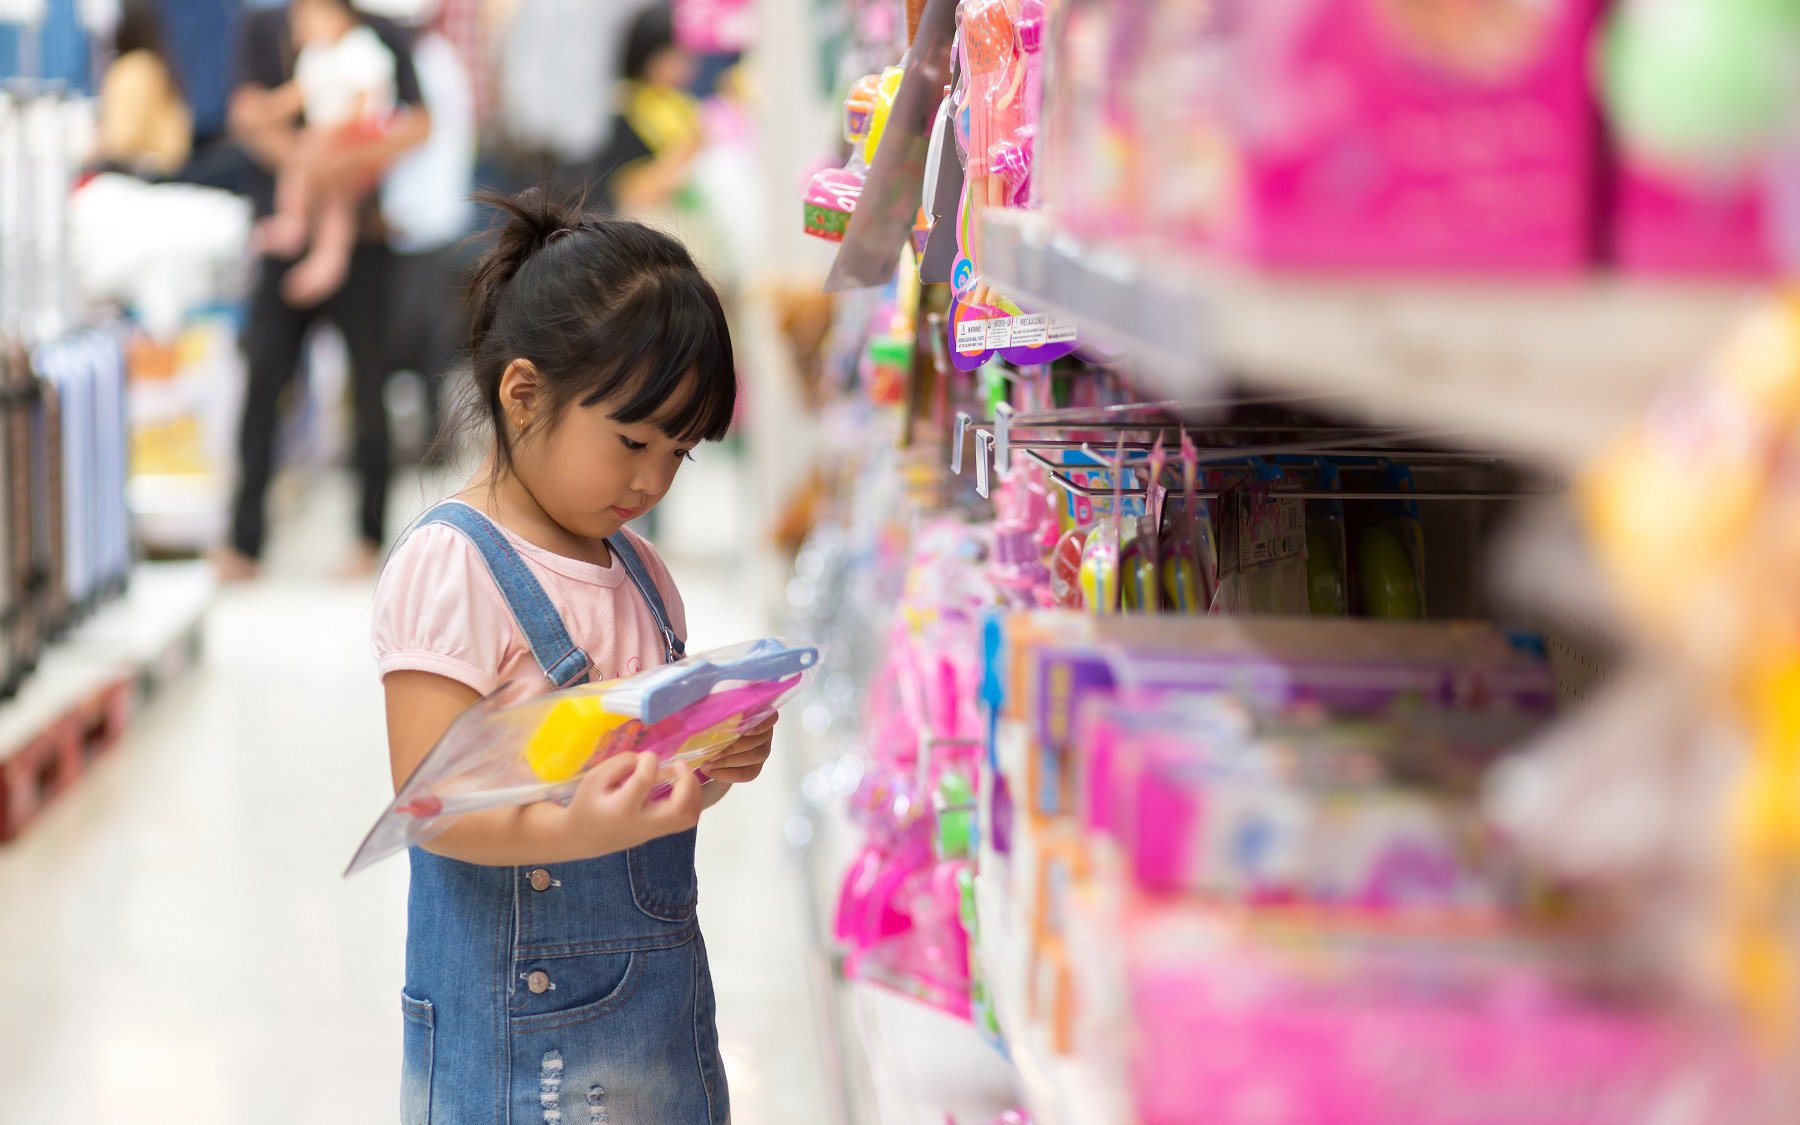 Image of Gen Alpha: Changing the Retail Landscape, Today’s 6- to 16-year-olds are growing up in a world markedly different from previous generations.